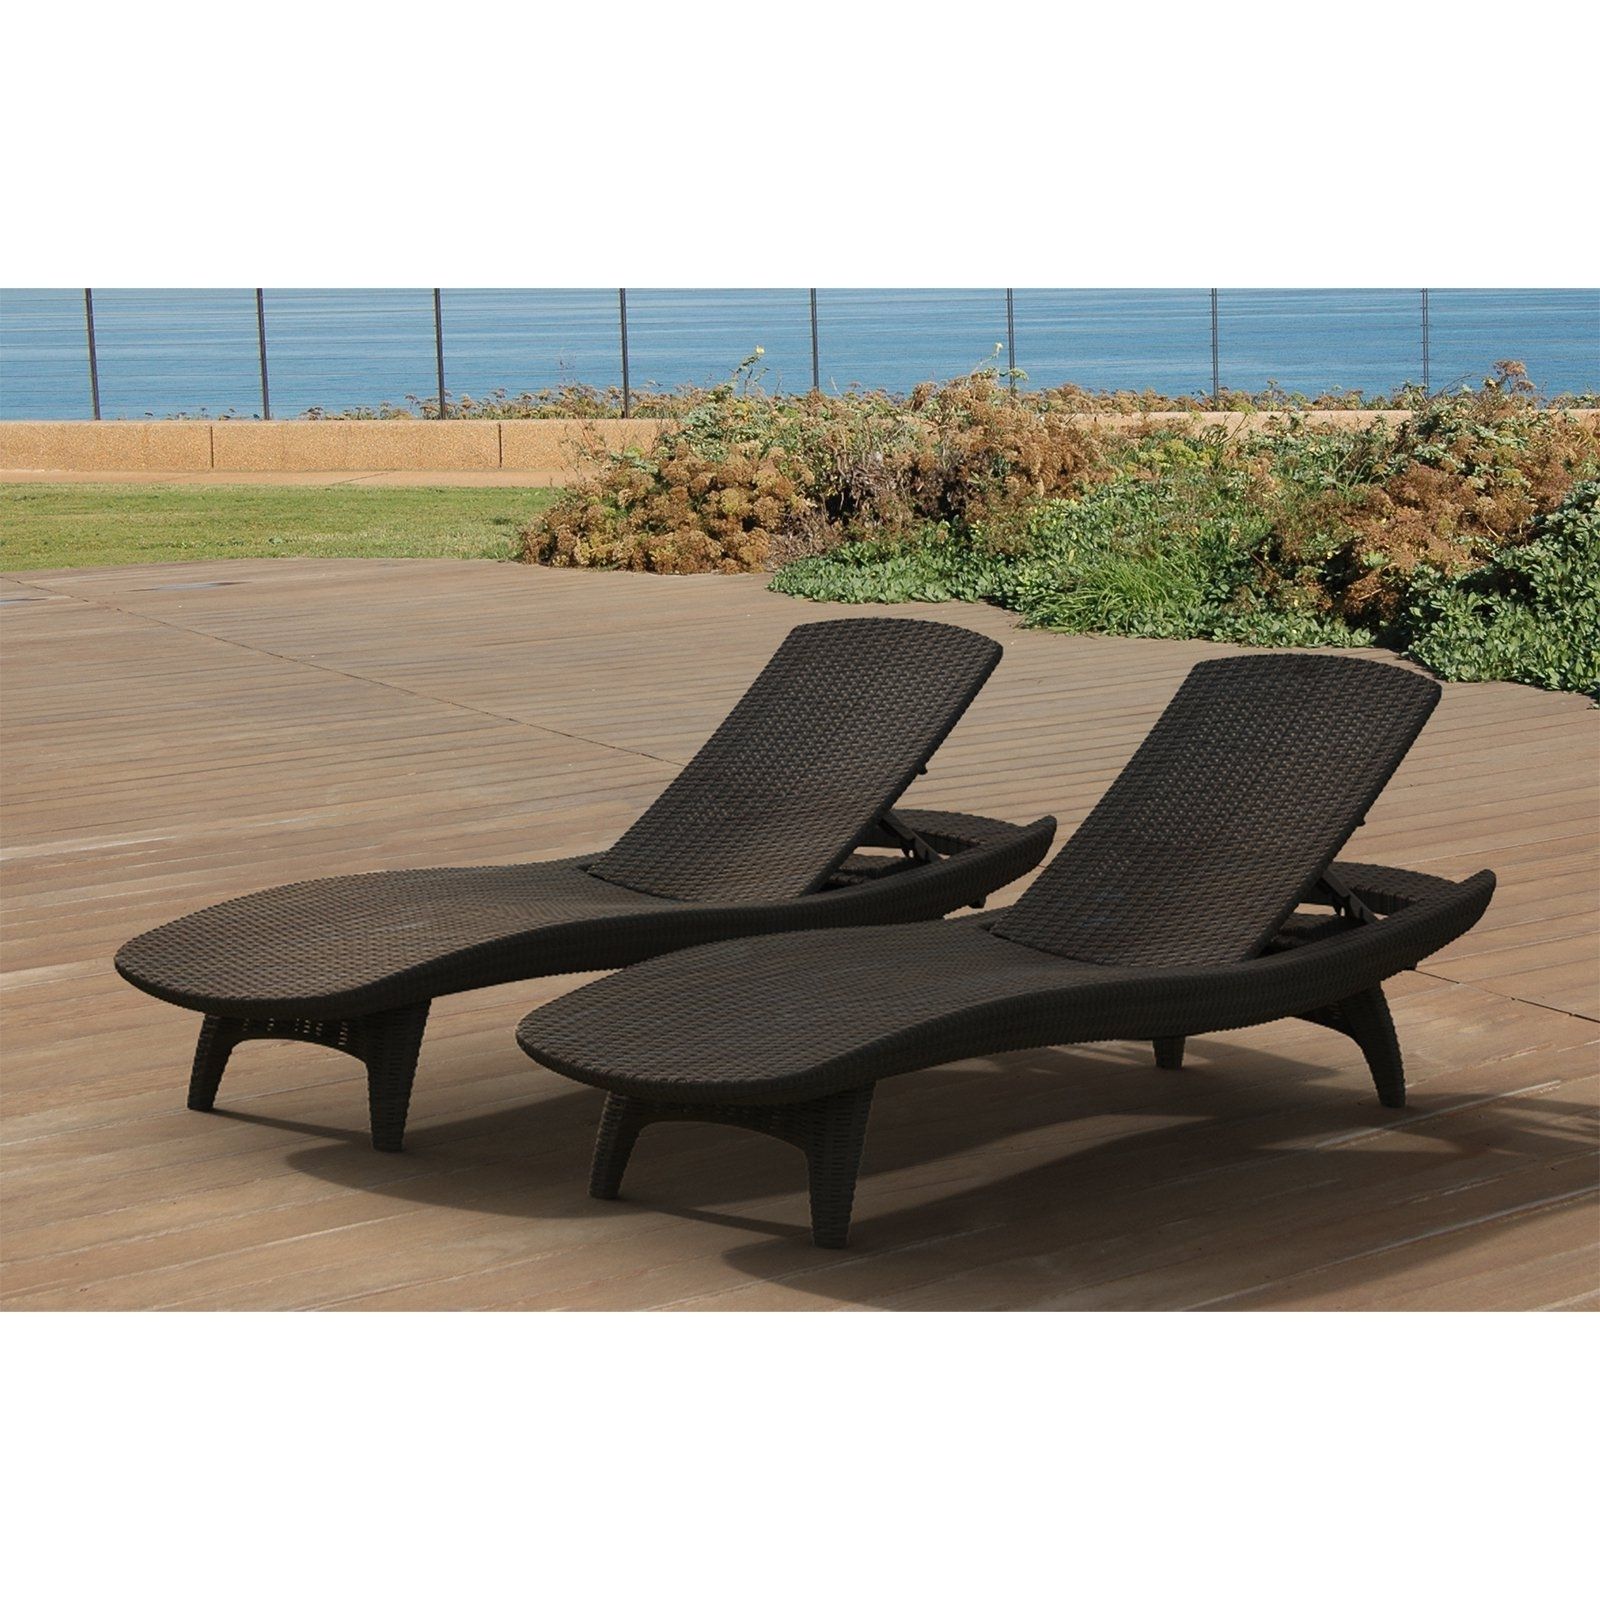 Hotel Pool Chaise Lounge Chairs In Newest Hotel Pool Chaise Lounge Chairs • Lounge Chairs Ideas (Photo 1 of 15)